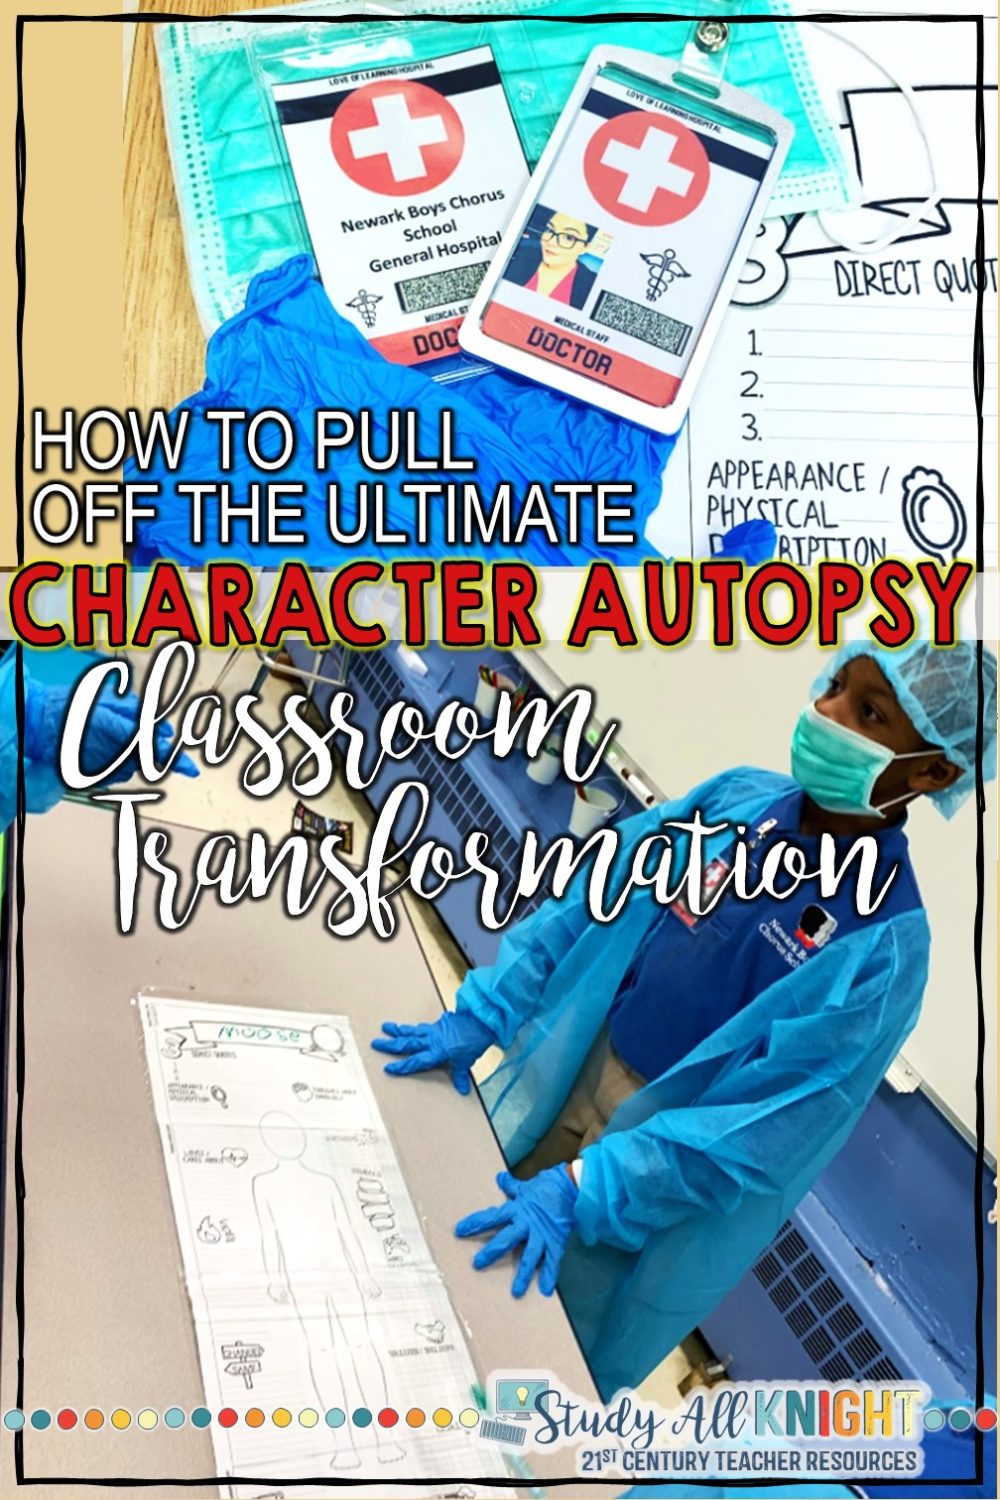 How Teachers Can Pull off the Ultimate Character Autopsy Classroom Transformation For Any Text. This isn't your every day character traits activity. Your students will love the hospital inspired classroom transformation! Students use the body biography characterization strategy to perform a character autopsy. Read the step by step, from classroom set up, groups, assessment, finding the fun materials to create this memorable activity any time of the year for any text. Finding textual evidence and text based responses have never been this much fun. Grades 4, 5, 6, 7, 8, 9 | English Language Arts | Middle School Teacher | Upper Elementary | Body Biography, Characterization, Game, Engaging, Collaboration 